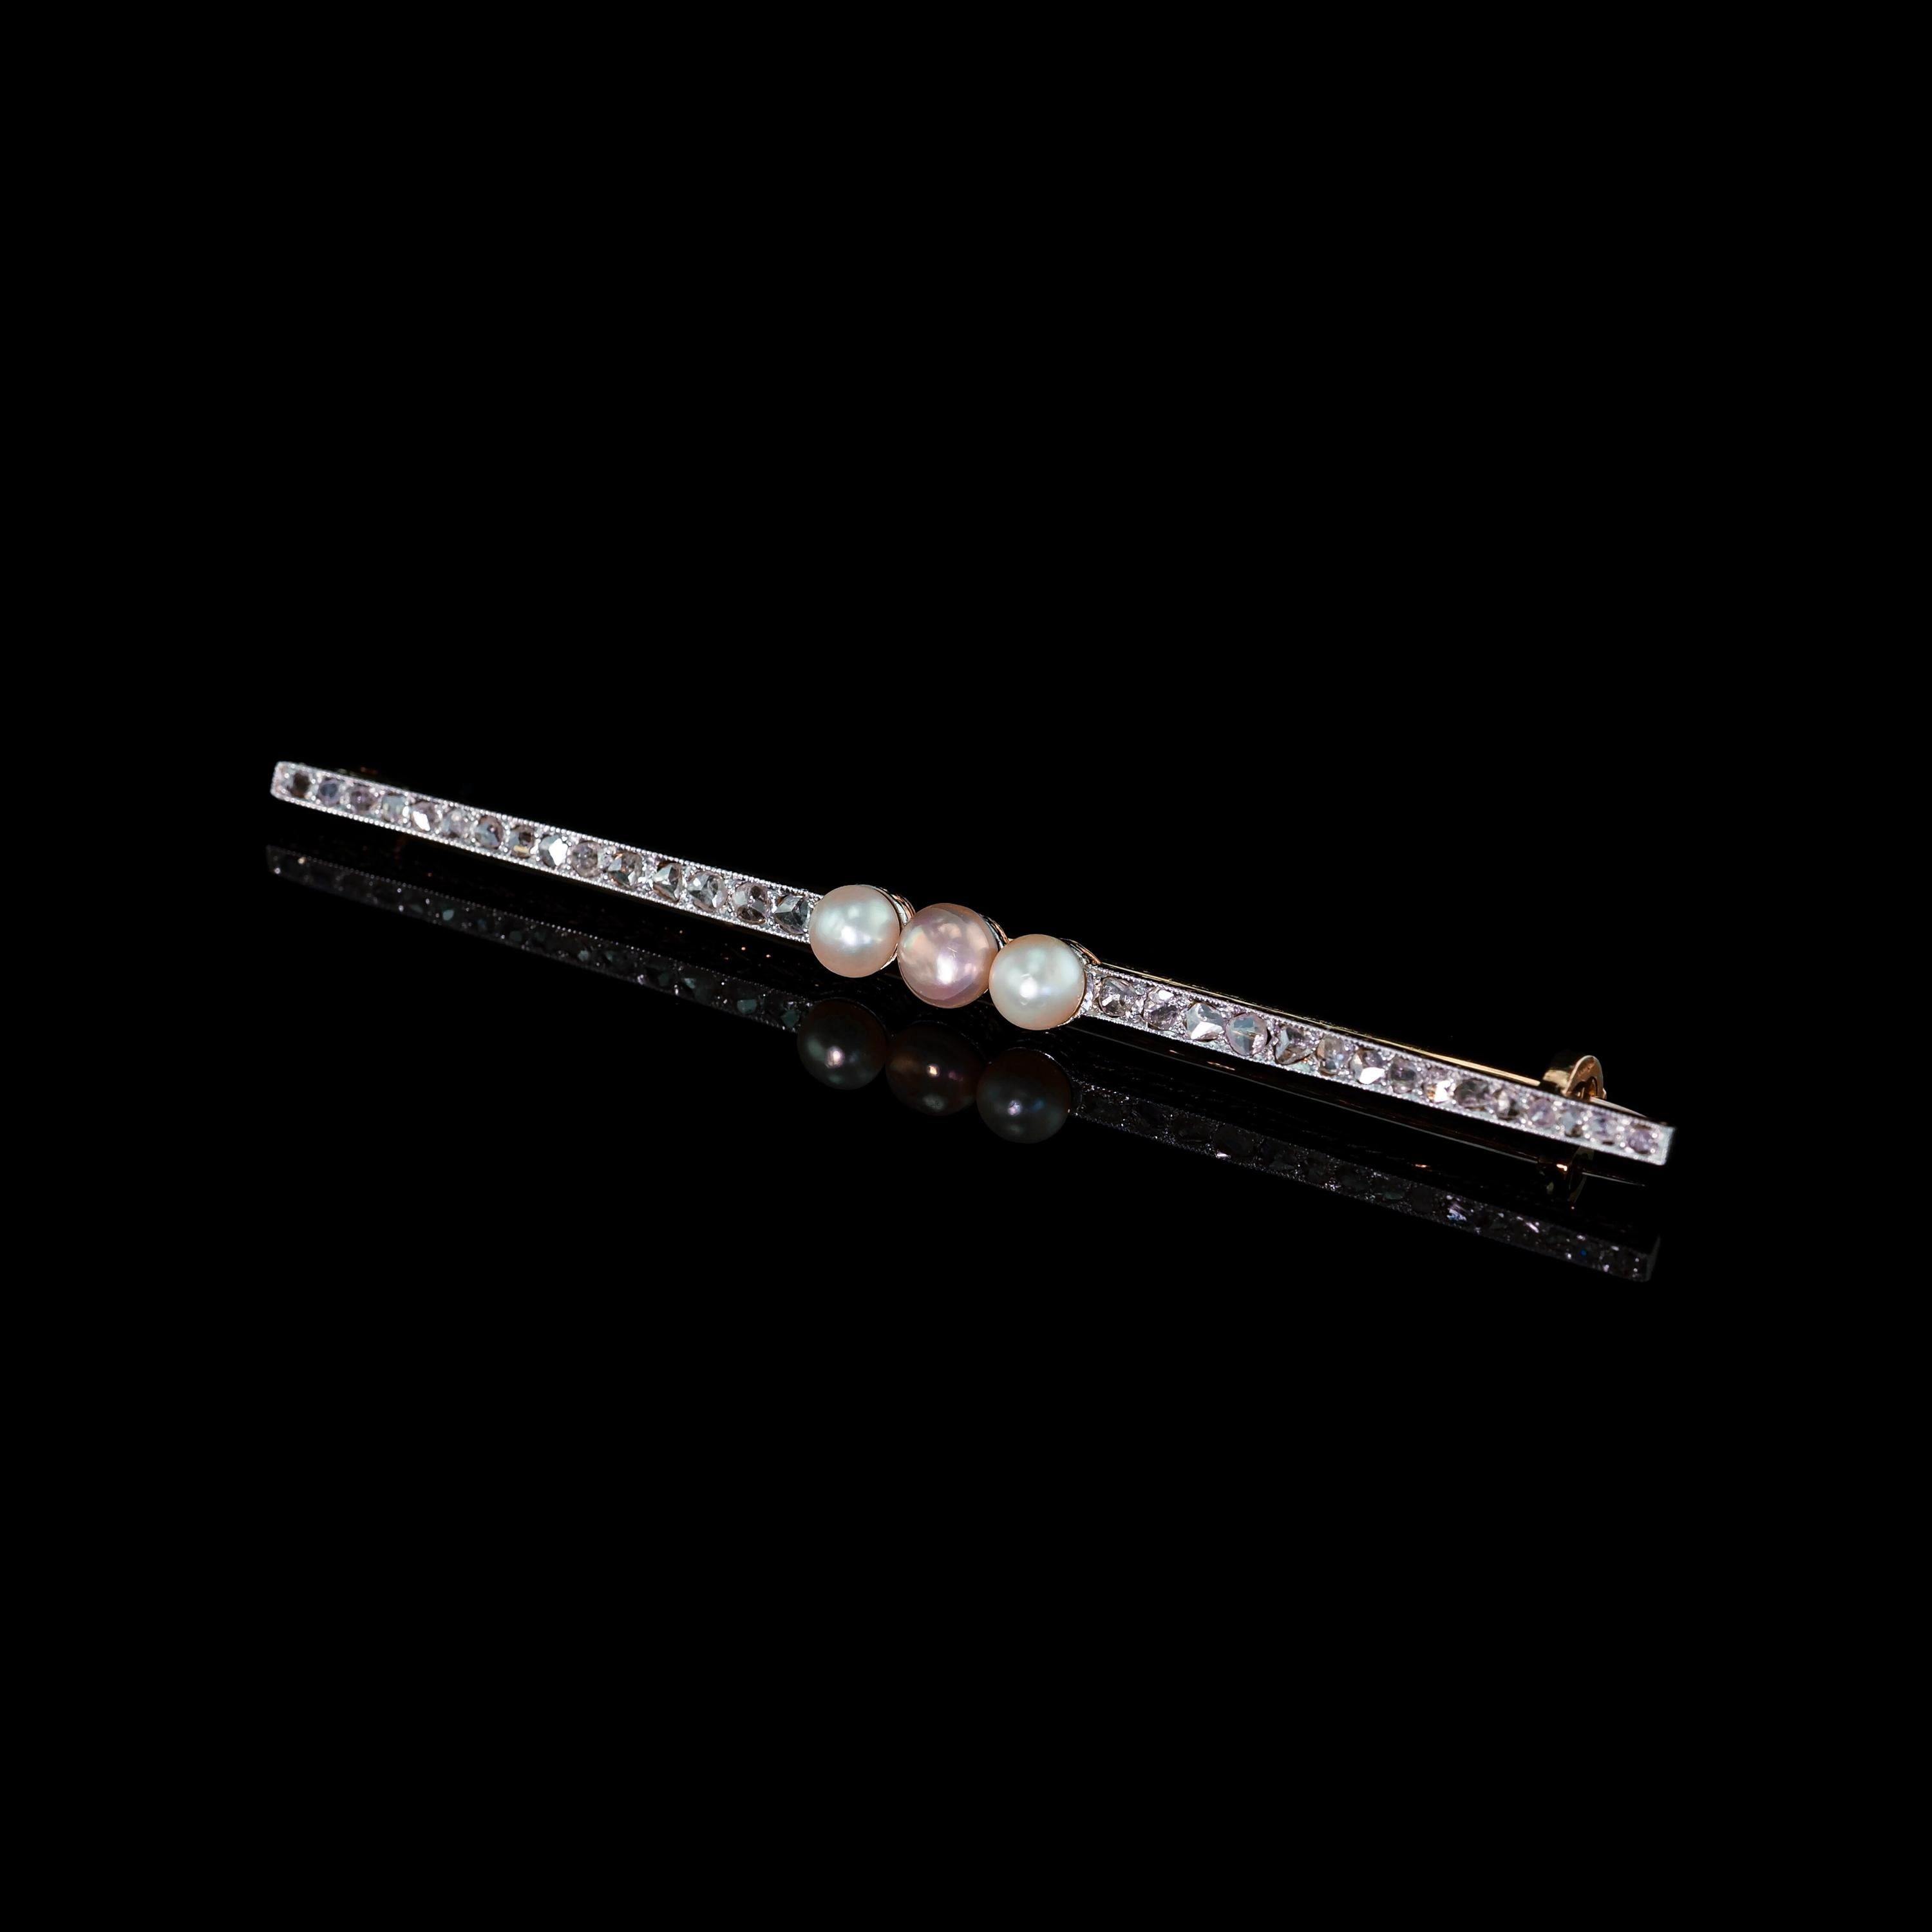 Antique 18ct Gold & Platinum Pink Pearl & Diamond Brooch - c.1920 For Sale 1